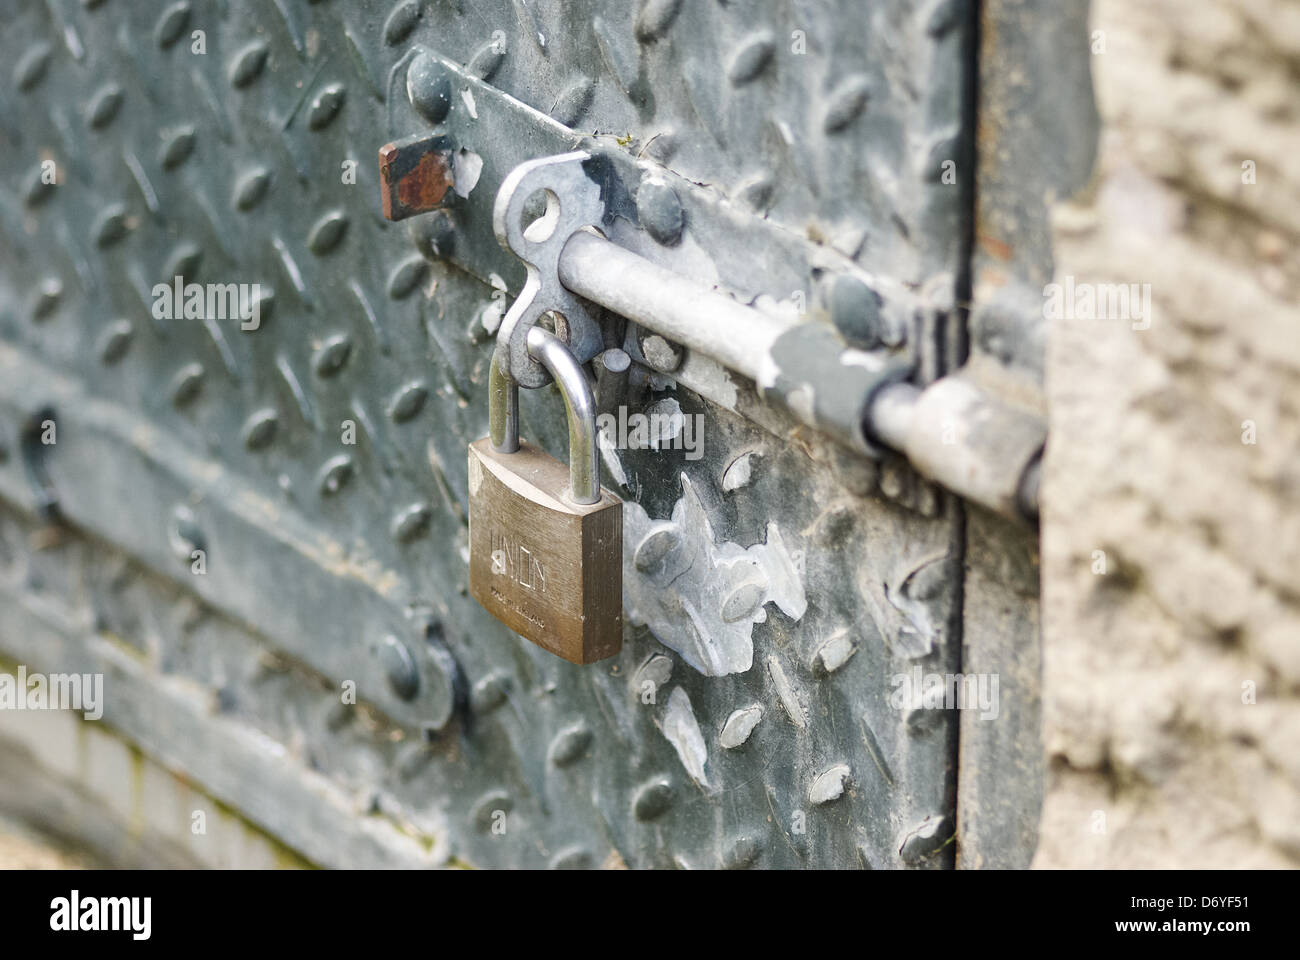 A Union padlock guarding the contents of who knows what. Stock Photo